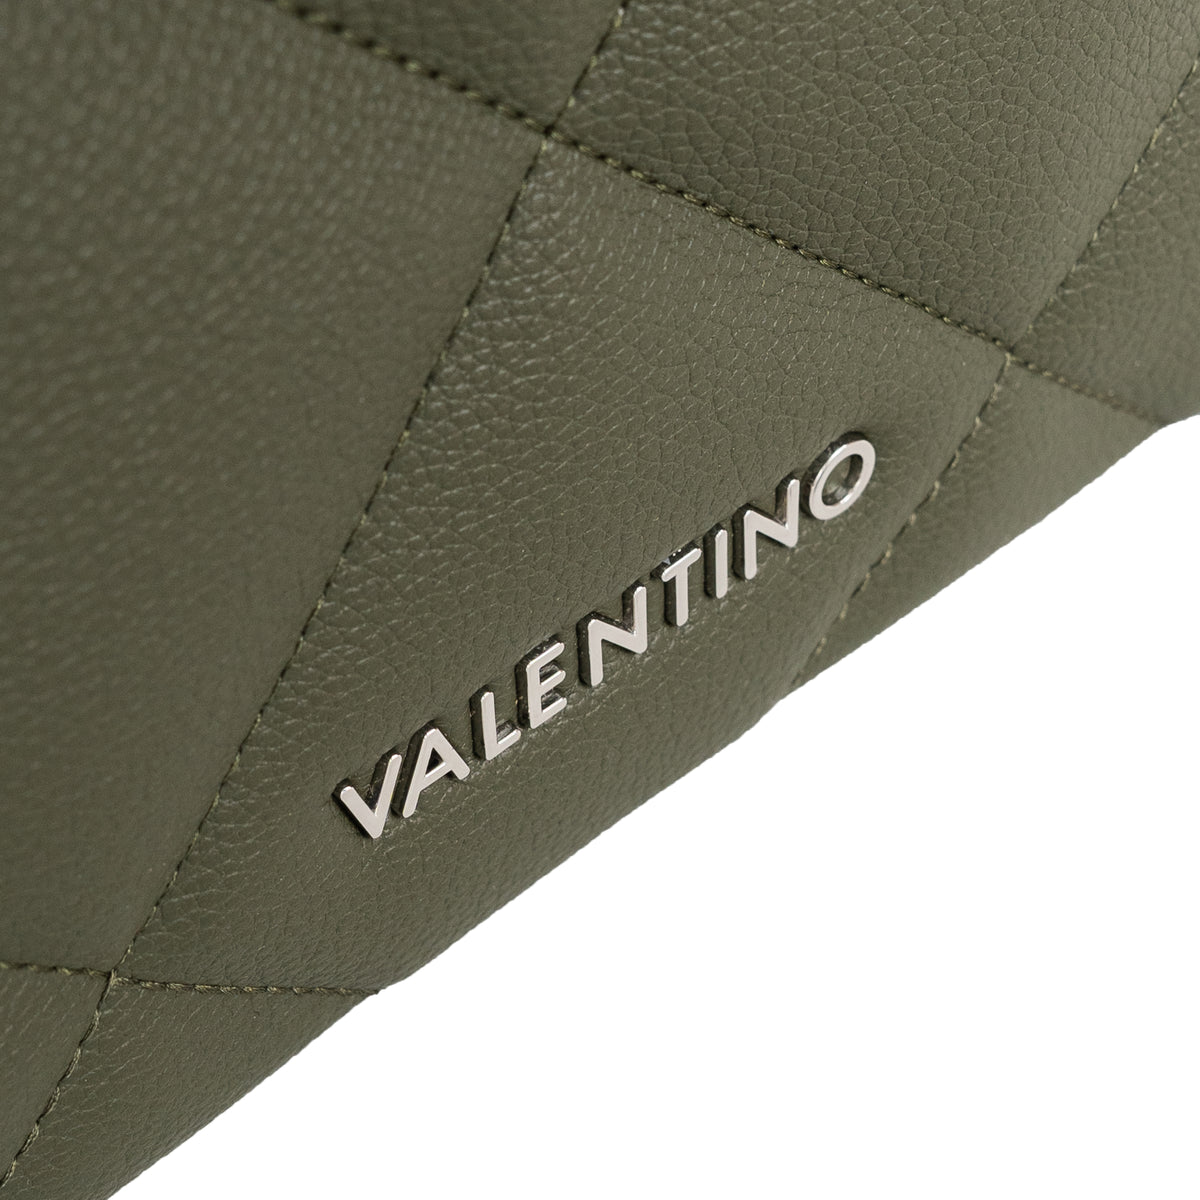 Load image into Gallery viewer, Valentino Bags Military Green Cold Re Bag
